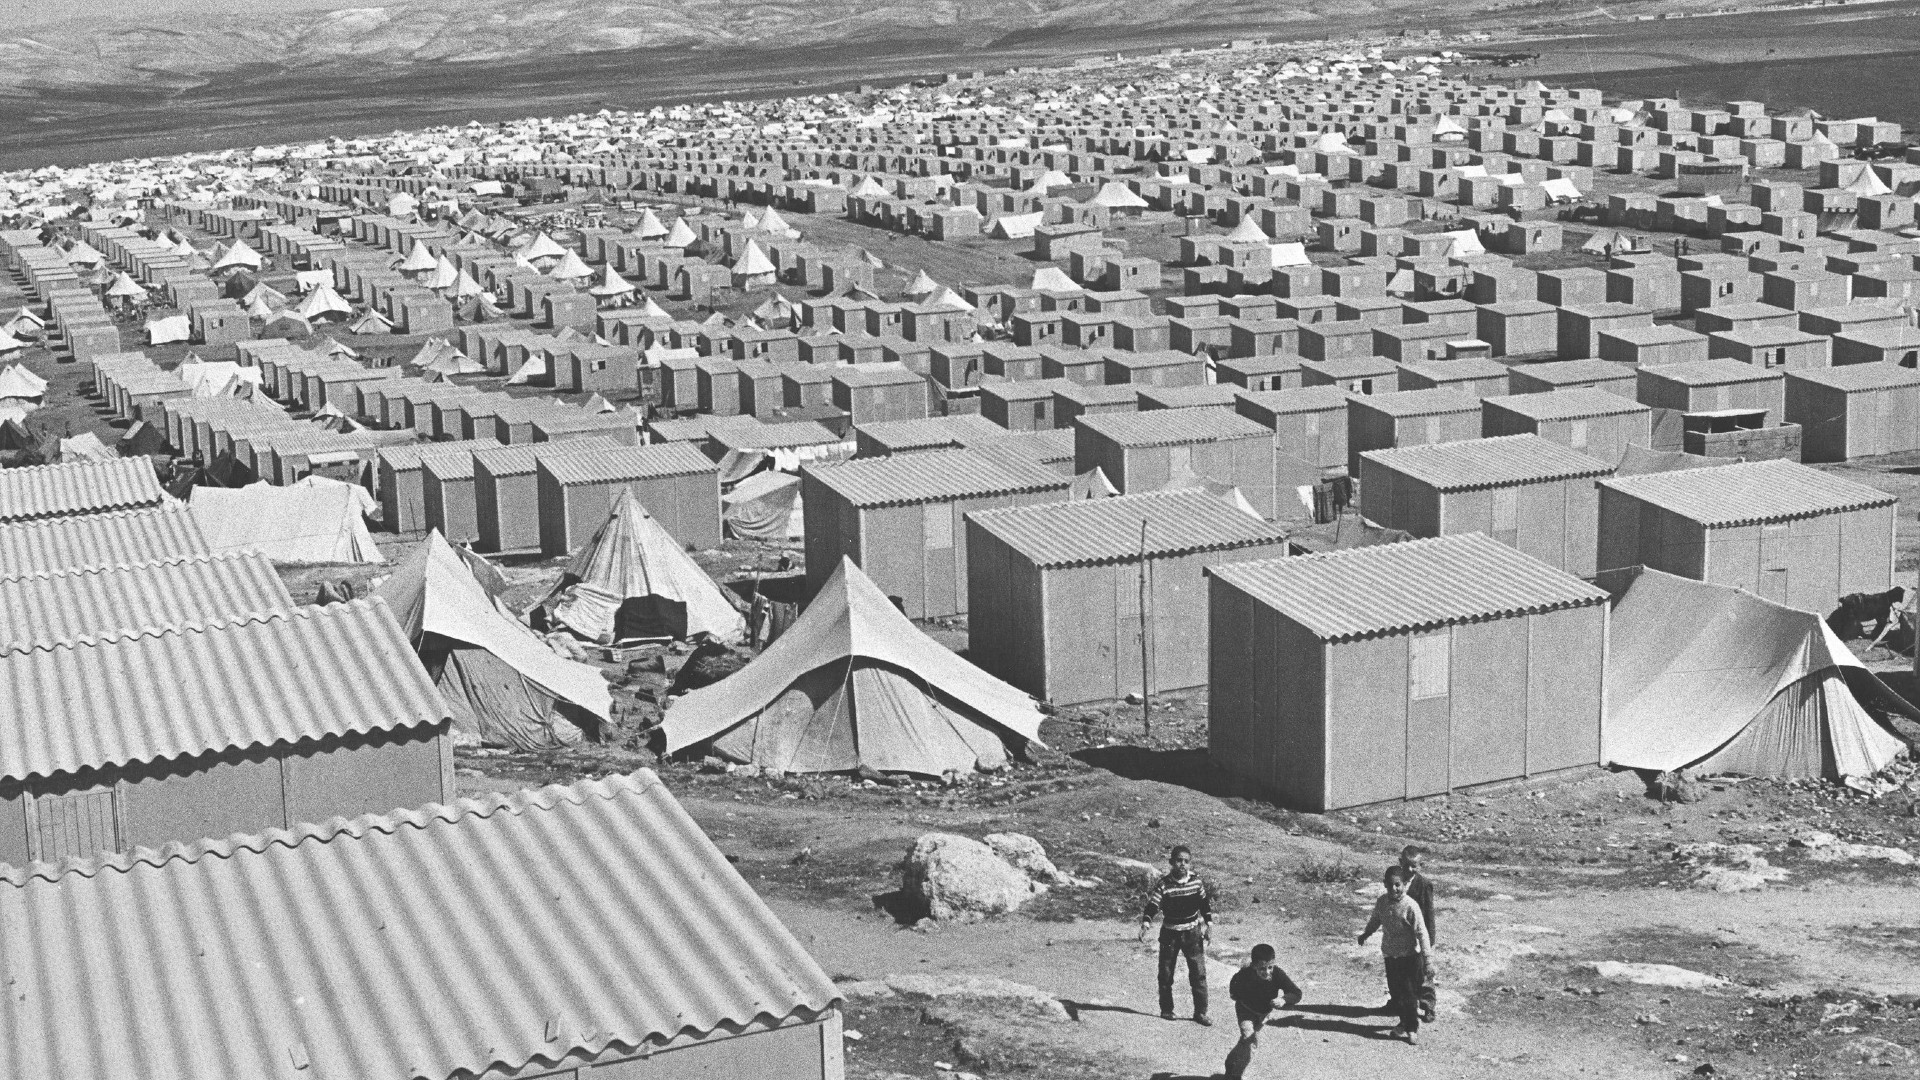 The 12-meter square prefabricated Unrwa shelter room given to each refugee family across Palestine camps within a grided layout, here in Baqa’a camp in Jordan (Courtsey: Unrwa/Photo by G. Nehmeh, 1969)